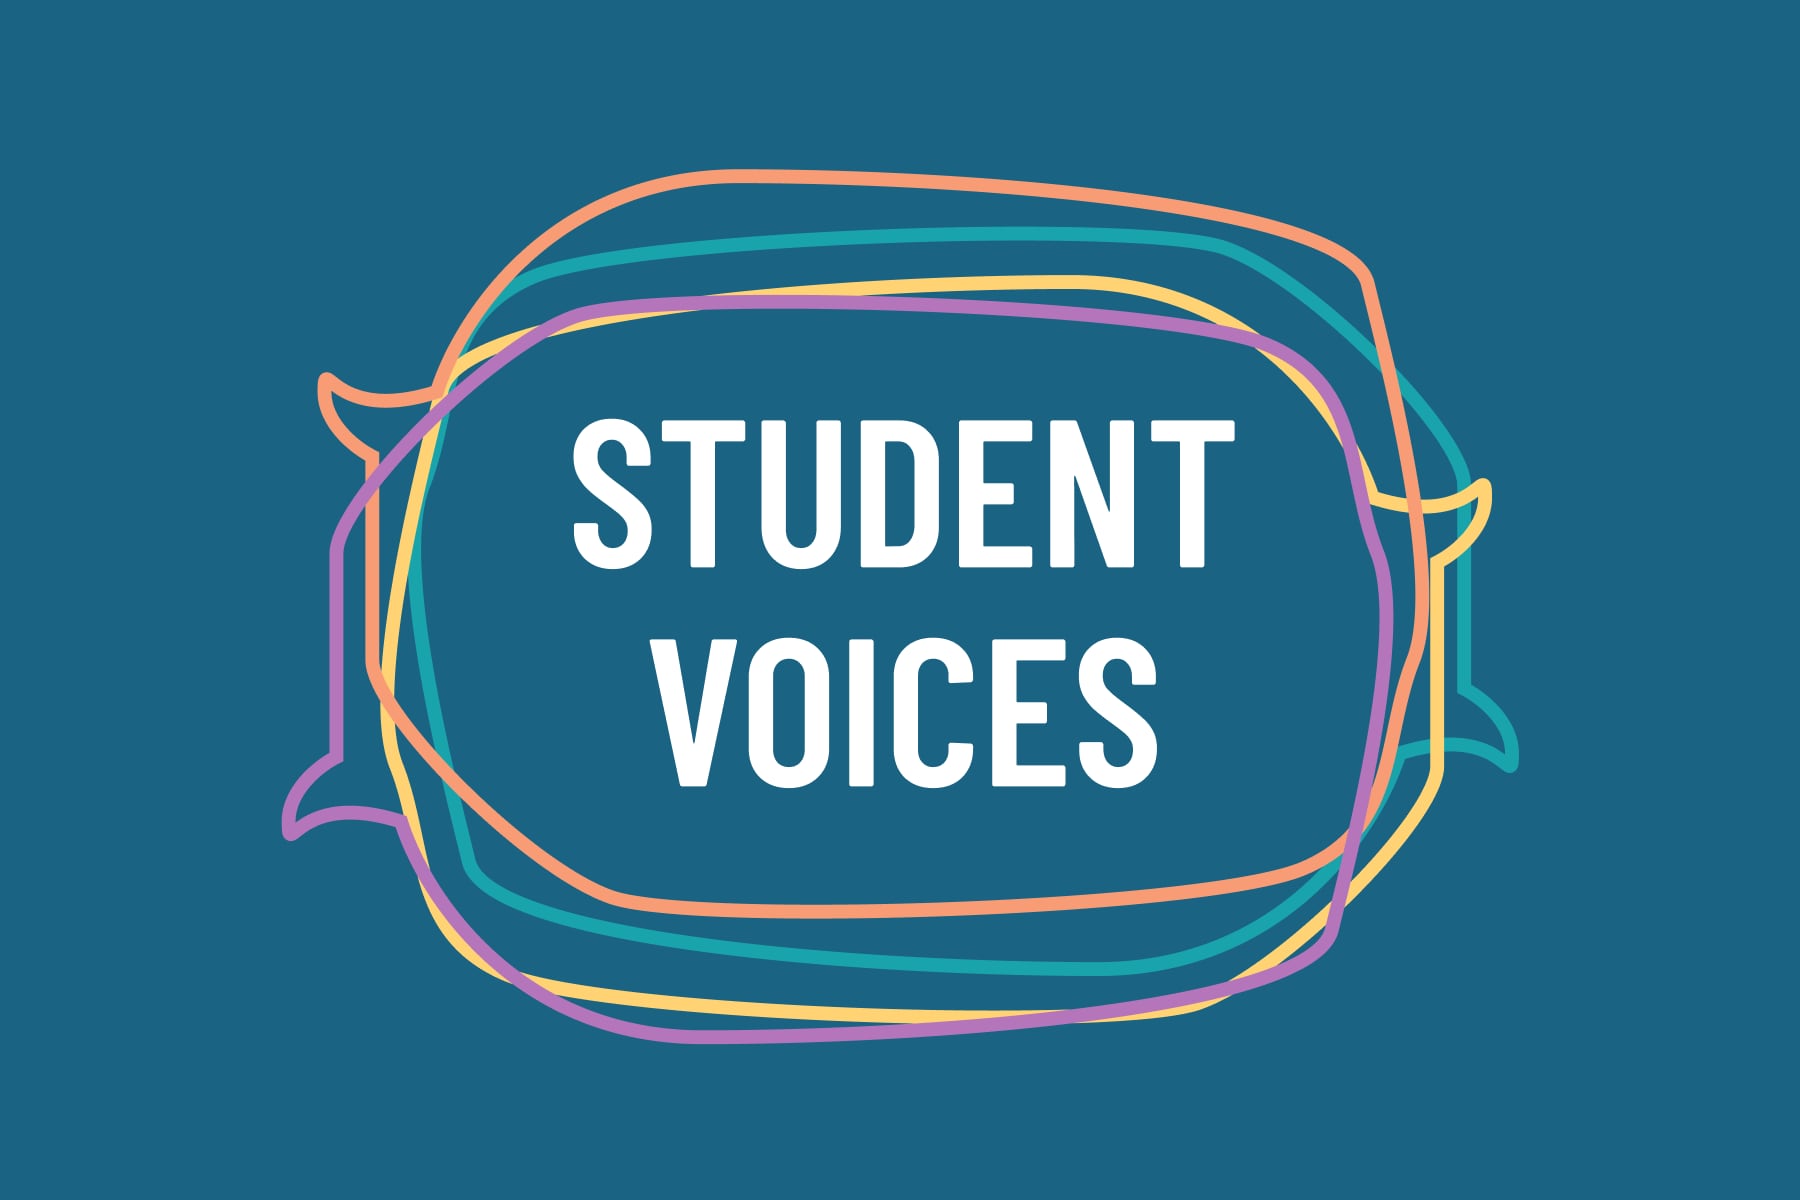 White text on a dark blue background reads: Student Voices. The text is surrounded by overlapping speech bubbles.